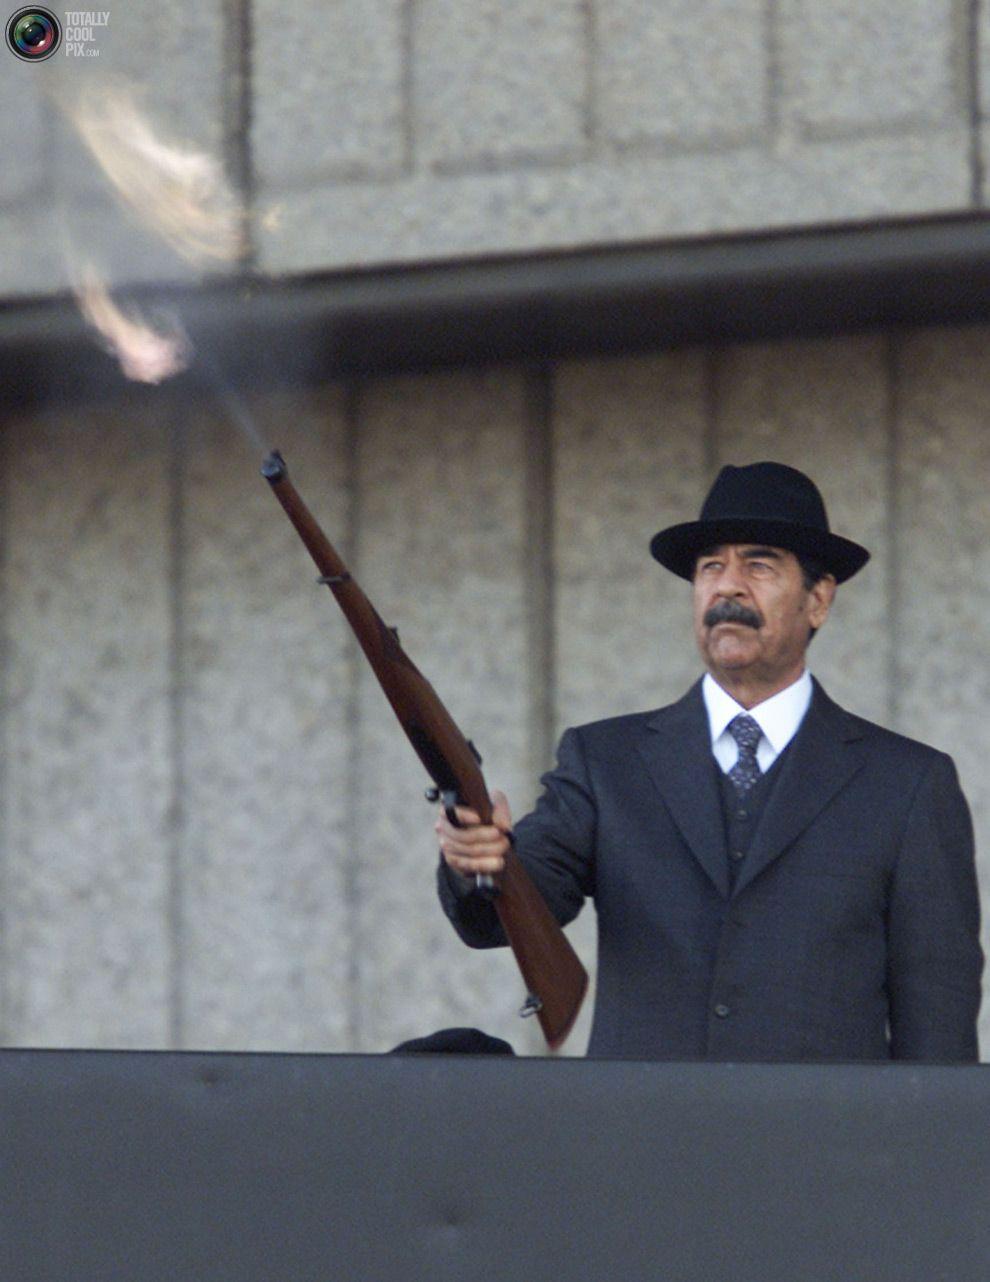 Iraqi President Saddam Hussein fires shots into the air on December